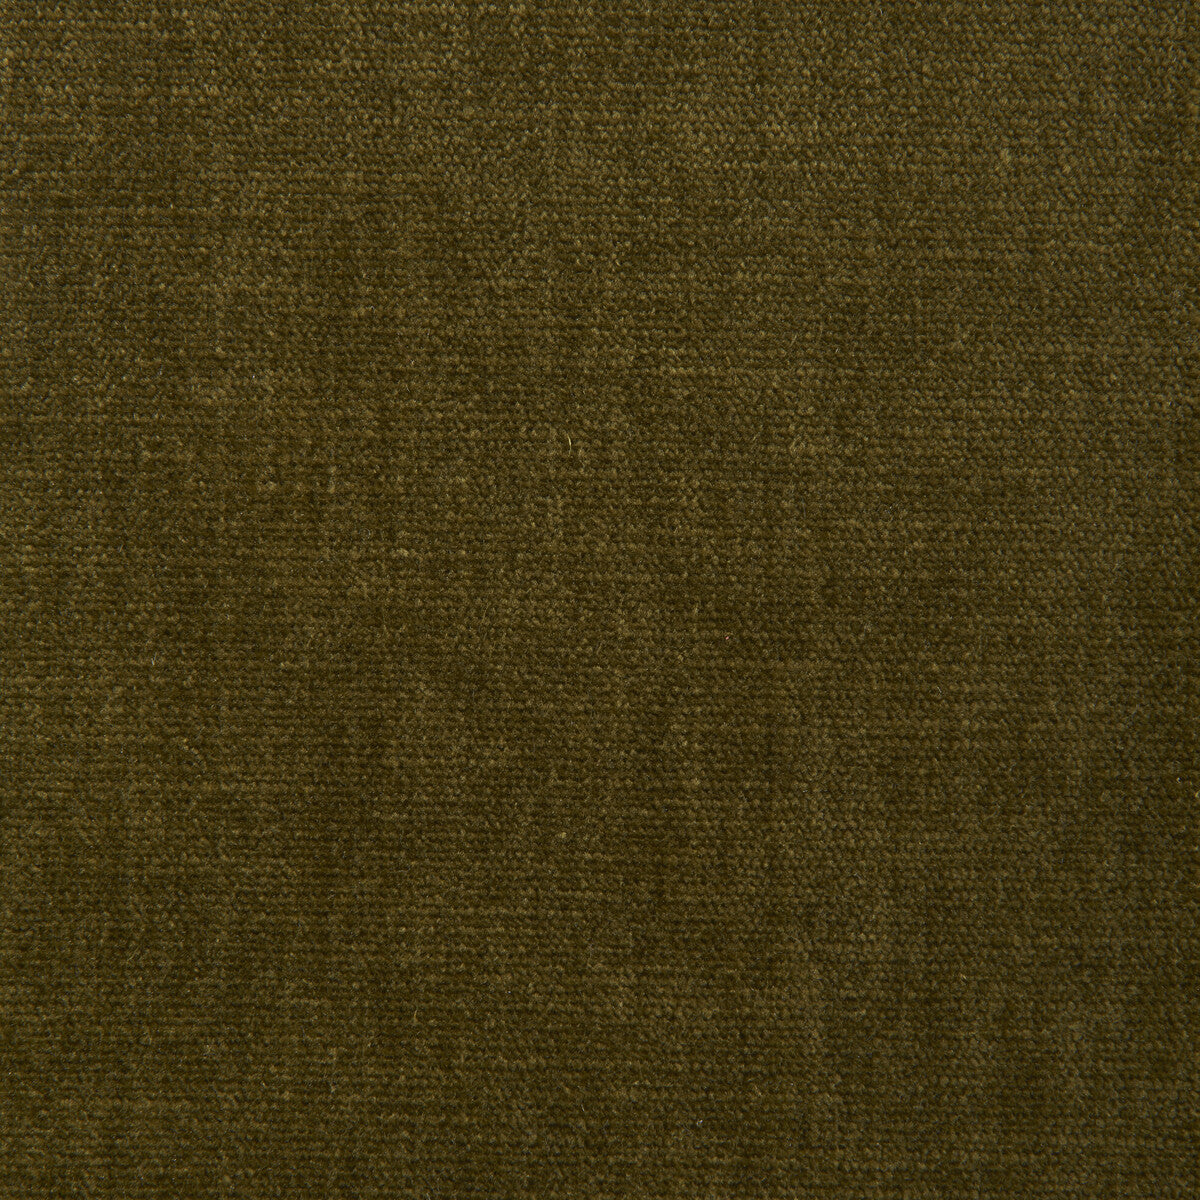 Kravet Smart fabric in 36076-330 color - pattern 36076.330.0 - by Kravet Smart in the Sumptuous Chenille II collection